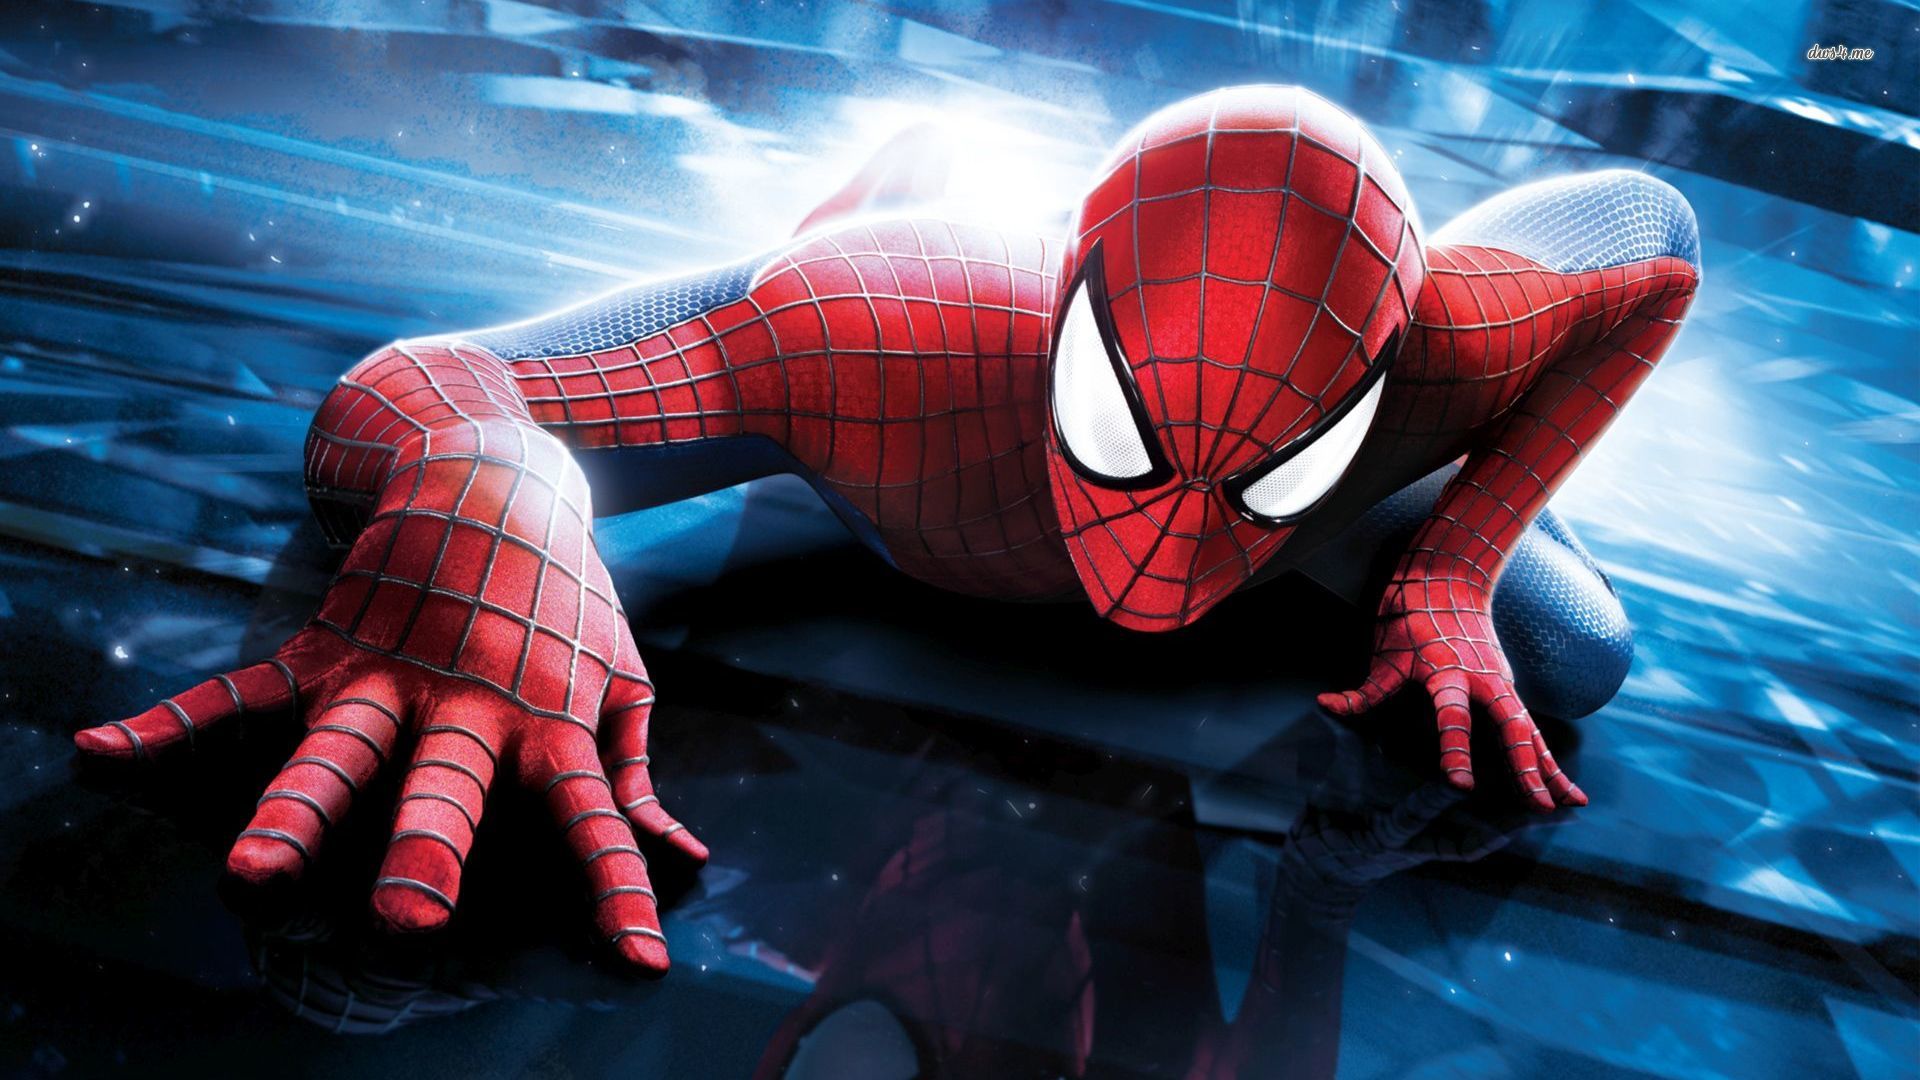 43325 spider man crawling on the building 1920x1080 movie